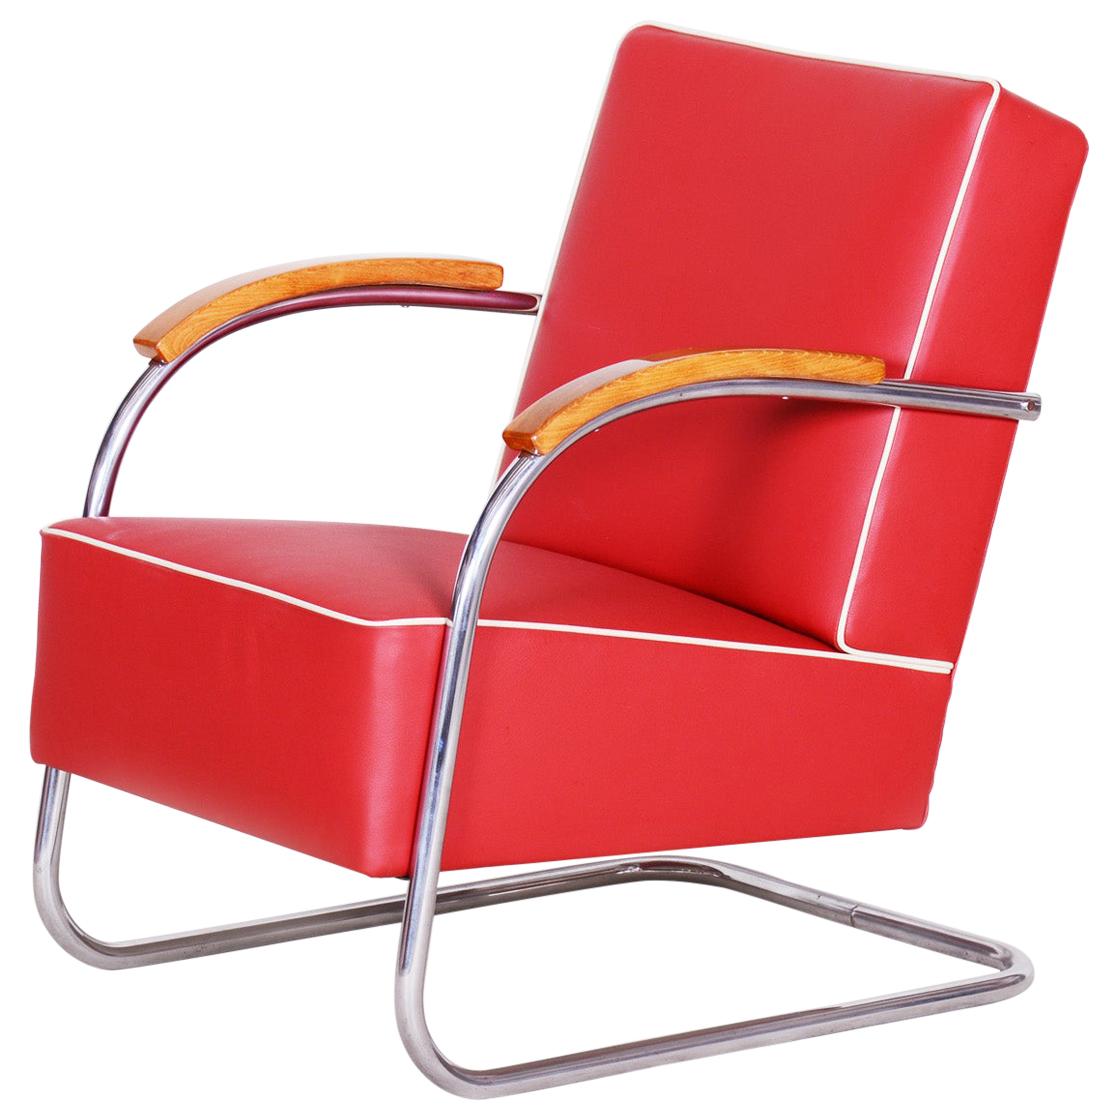 Red Tubular Steel Cantilever Chrome Armchair, High Quality Leather, 1930s For Sale